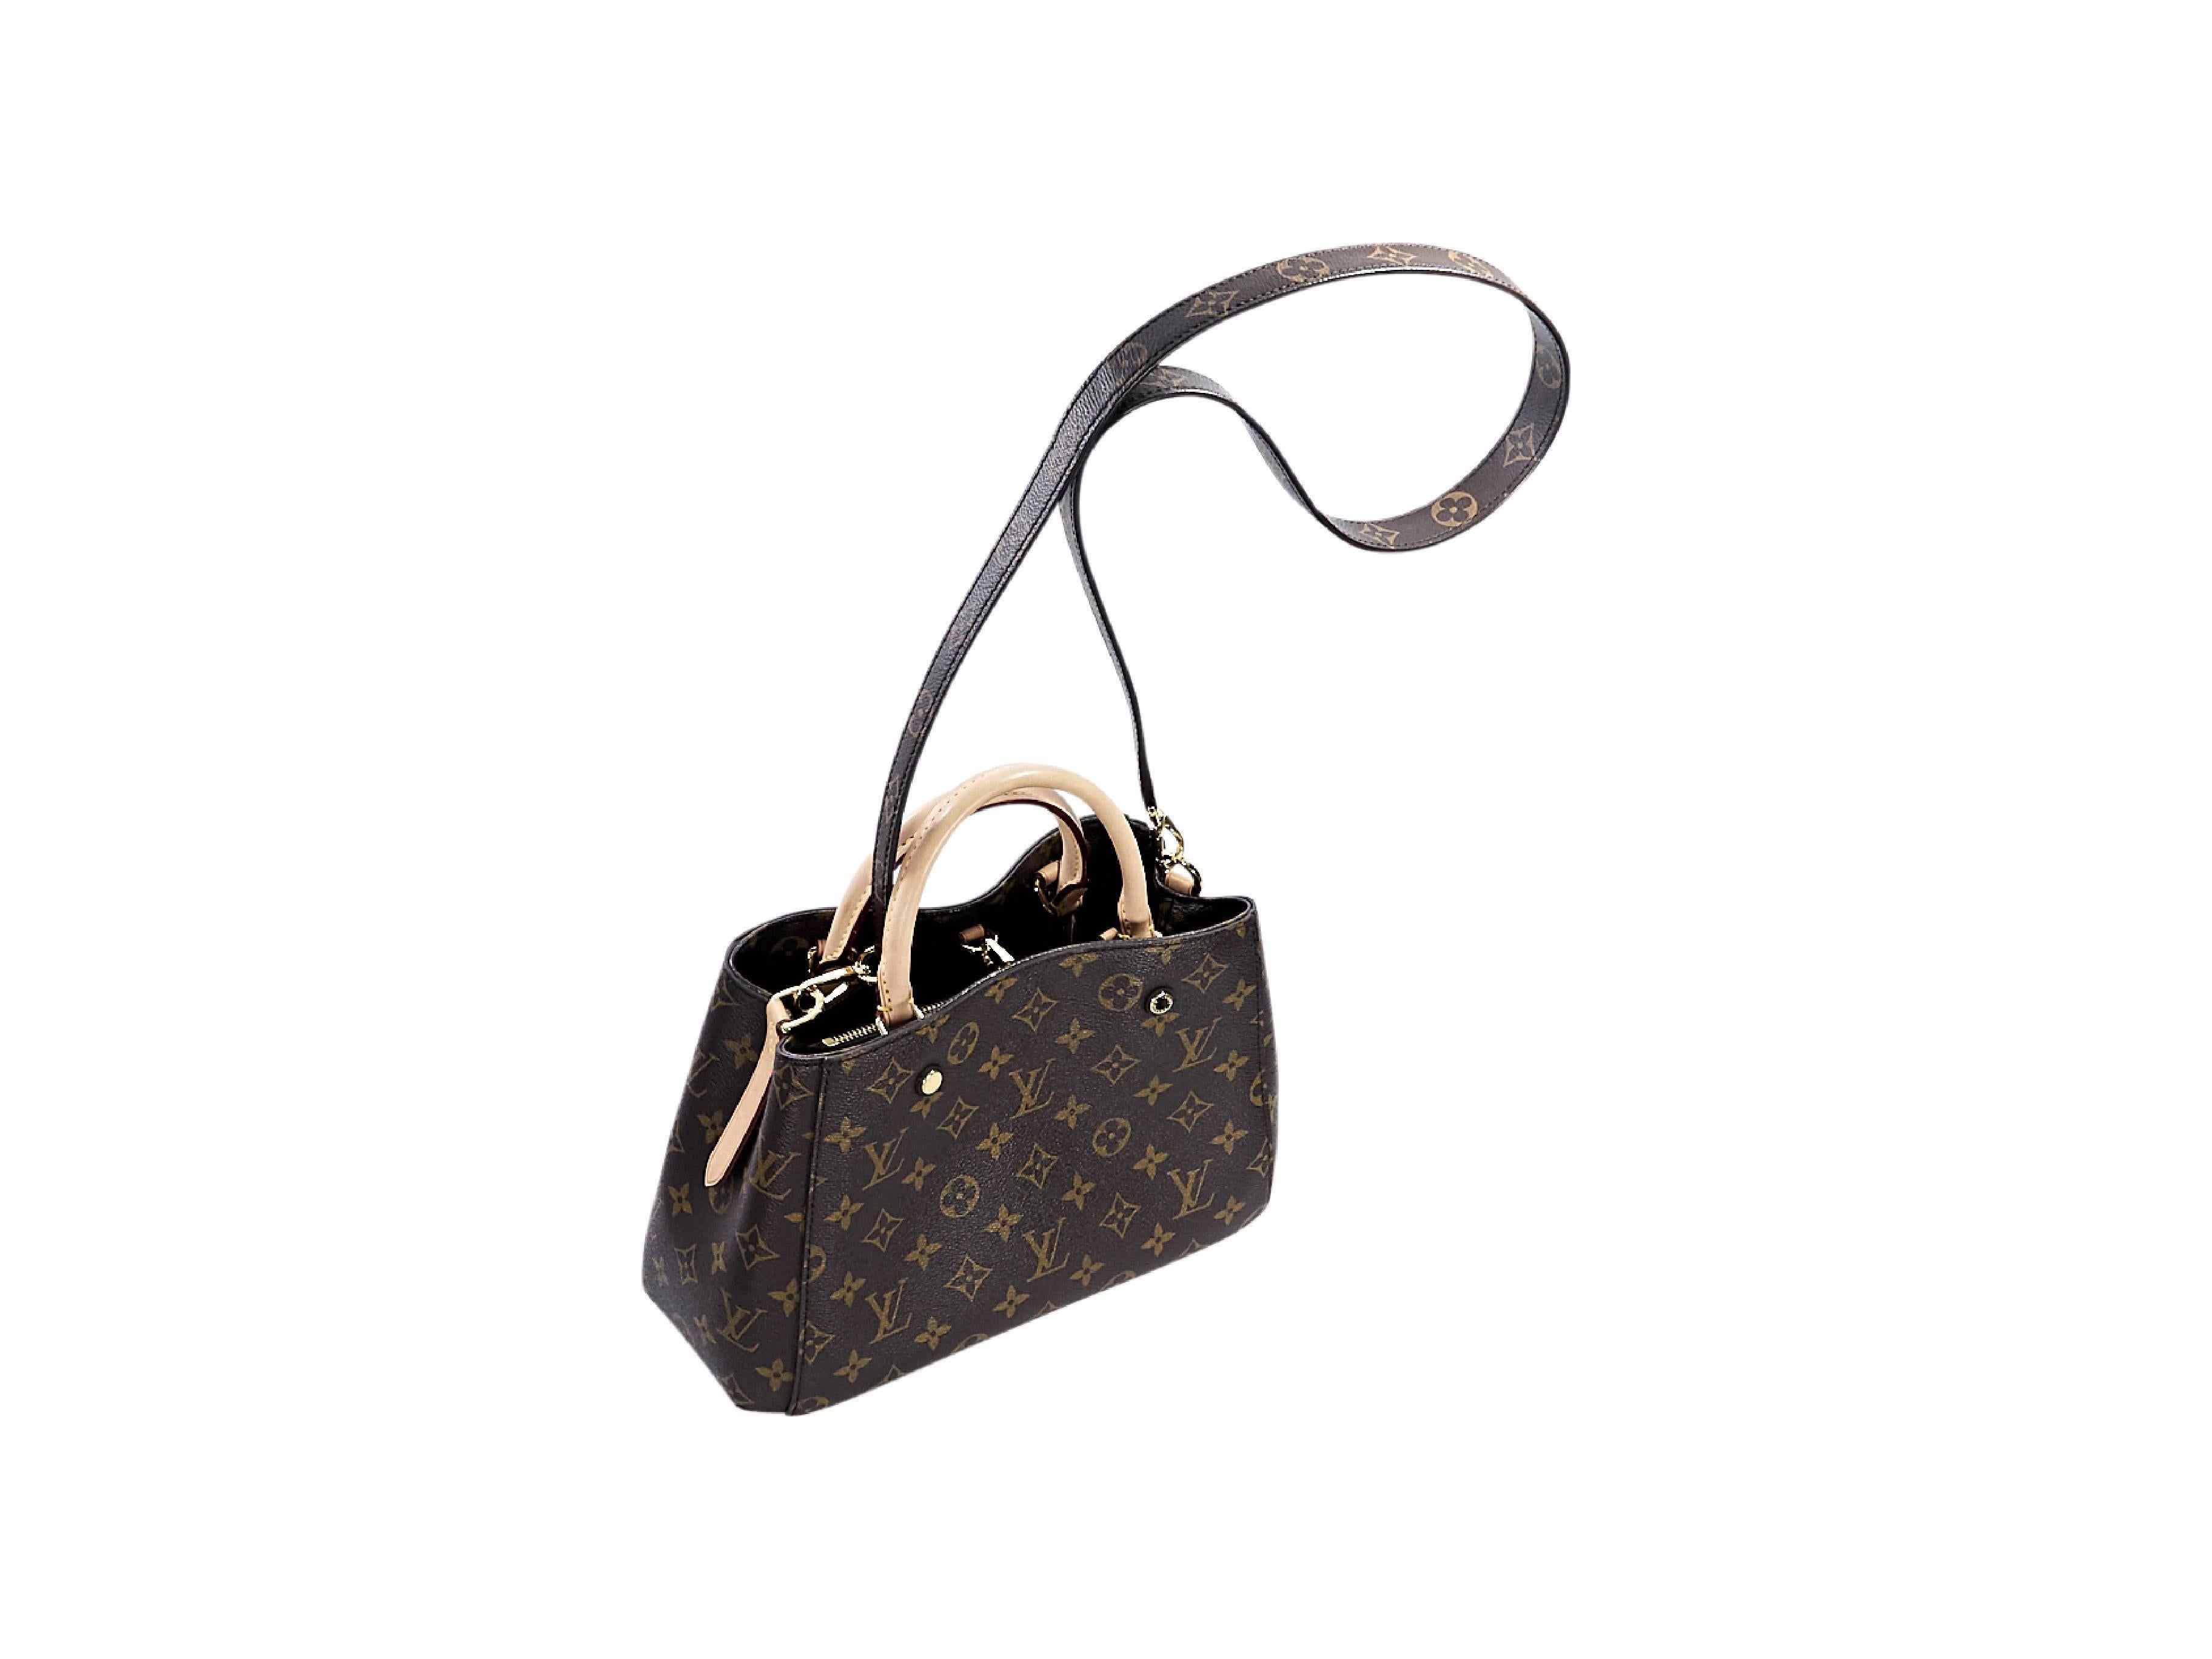 Product details:  Brown monogram canvas Montaigne BB satchel by Louis Vuitton.  Dual carry handle.  Detachable shoulder strap.  Inner bridge clasp closure.  Lined interior with inner center zip compartment and slide pockets.  Protective metal feet. 